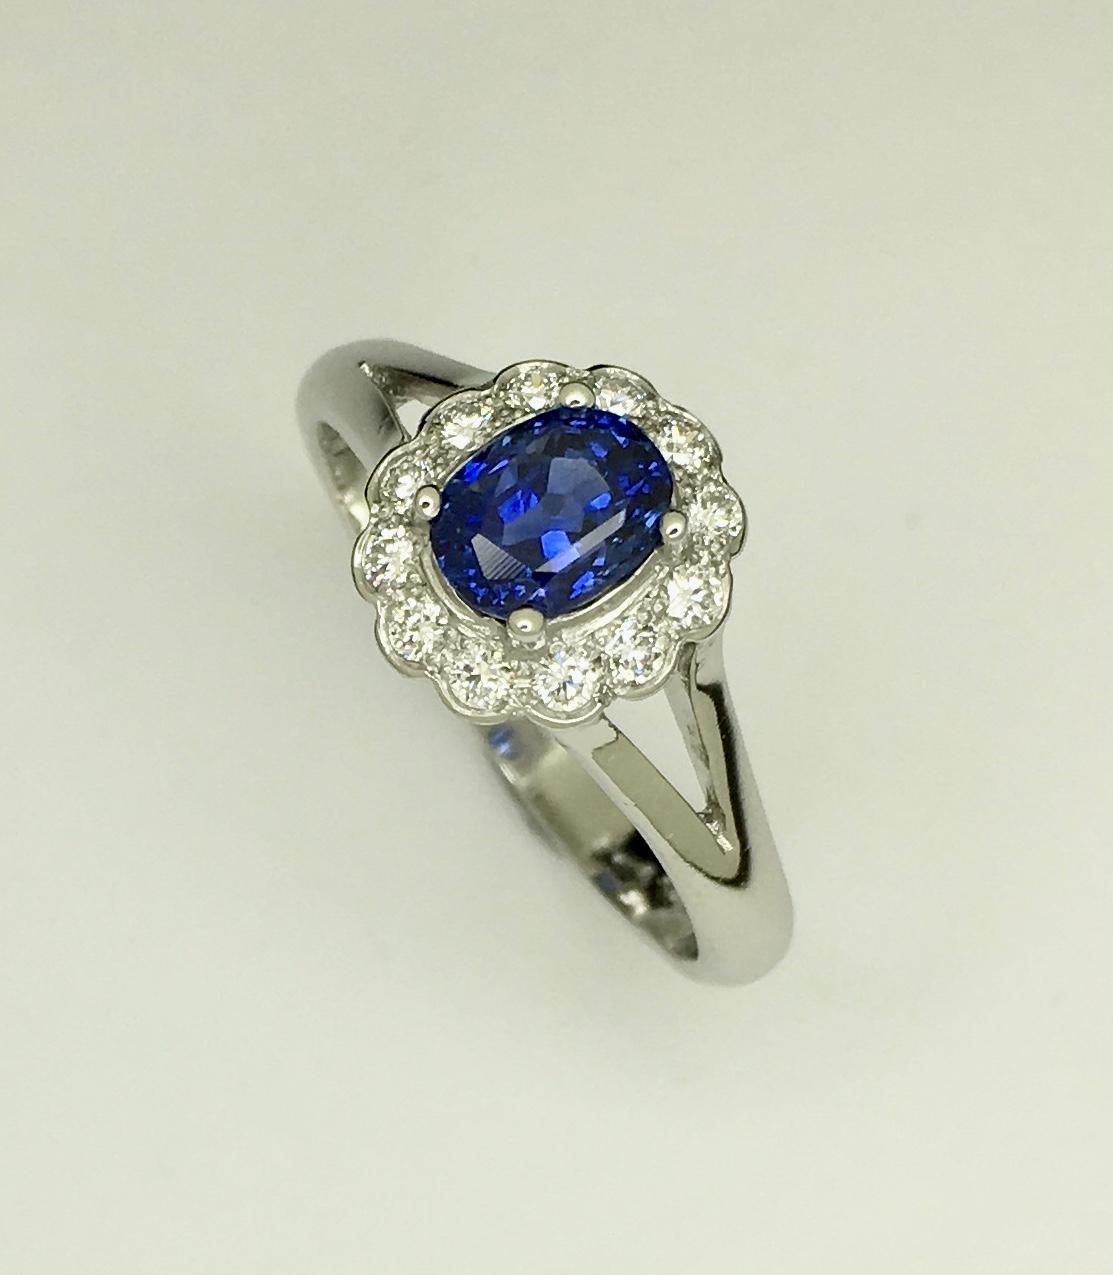 Platinum Untreated Ceylon Sapphire Diamond Cluster Ring

Classic vintage style cluster ring. Center stone is untreated oval blue sapphire set in a four claw setting. Surrounding the blue sapphire is 12 round brilliant cut diamond forming a scallop